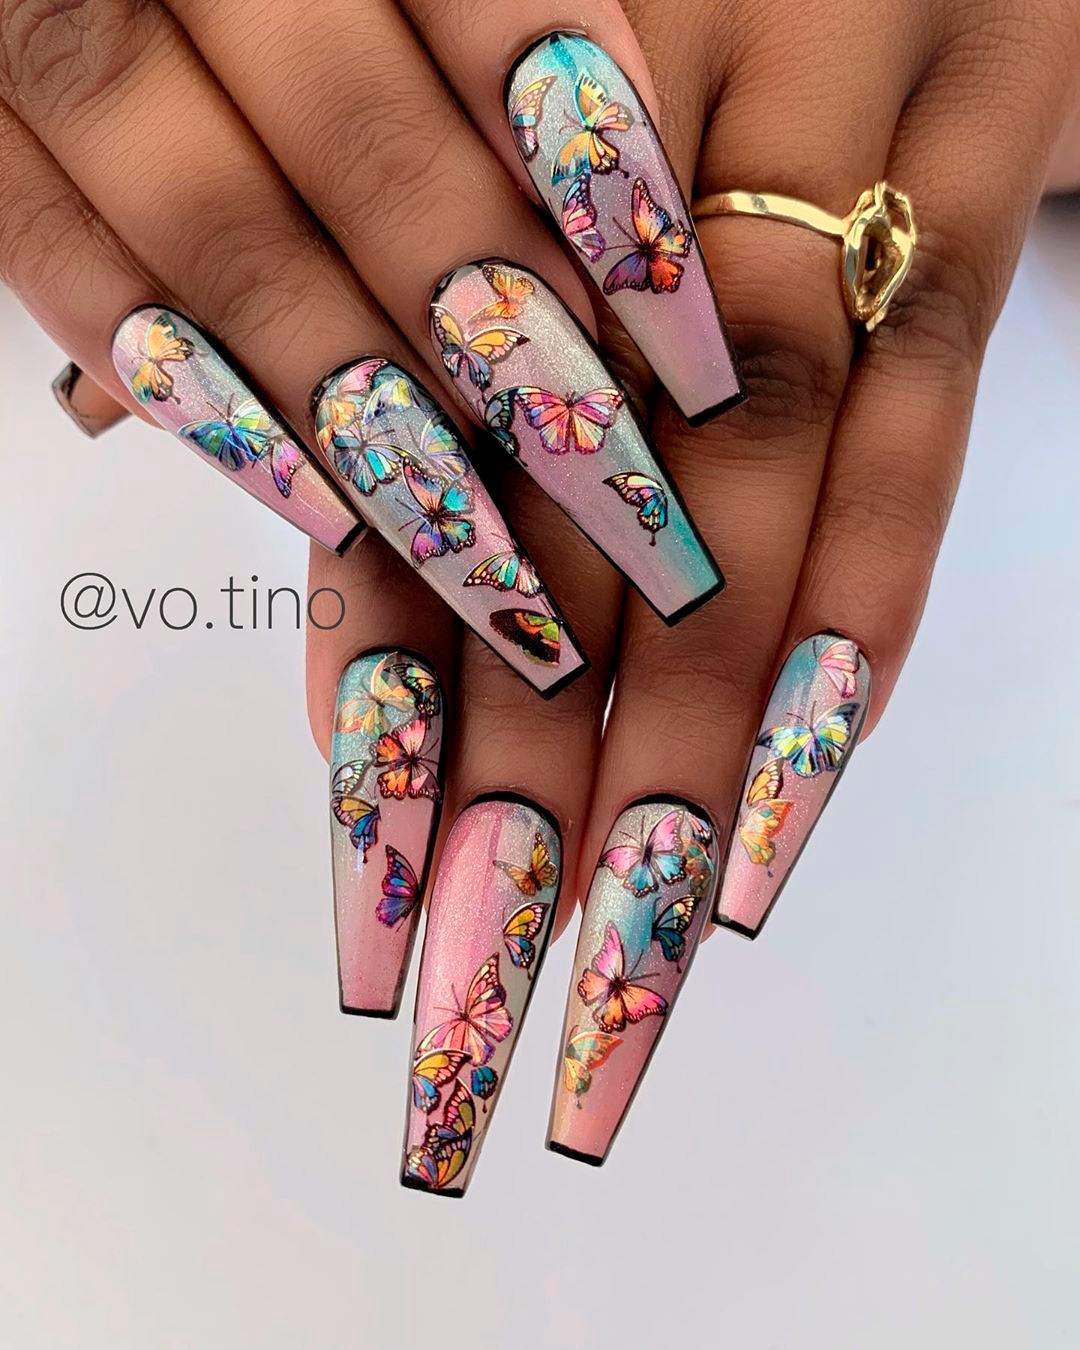 43 Crazy-Gorgeous Nail Ideas for Coffin Shaped Nails - StayGlam